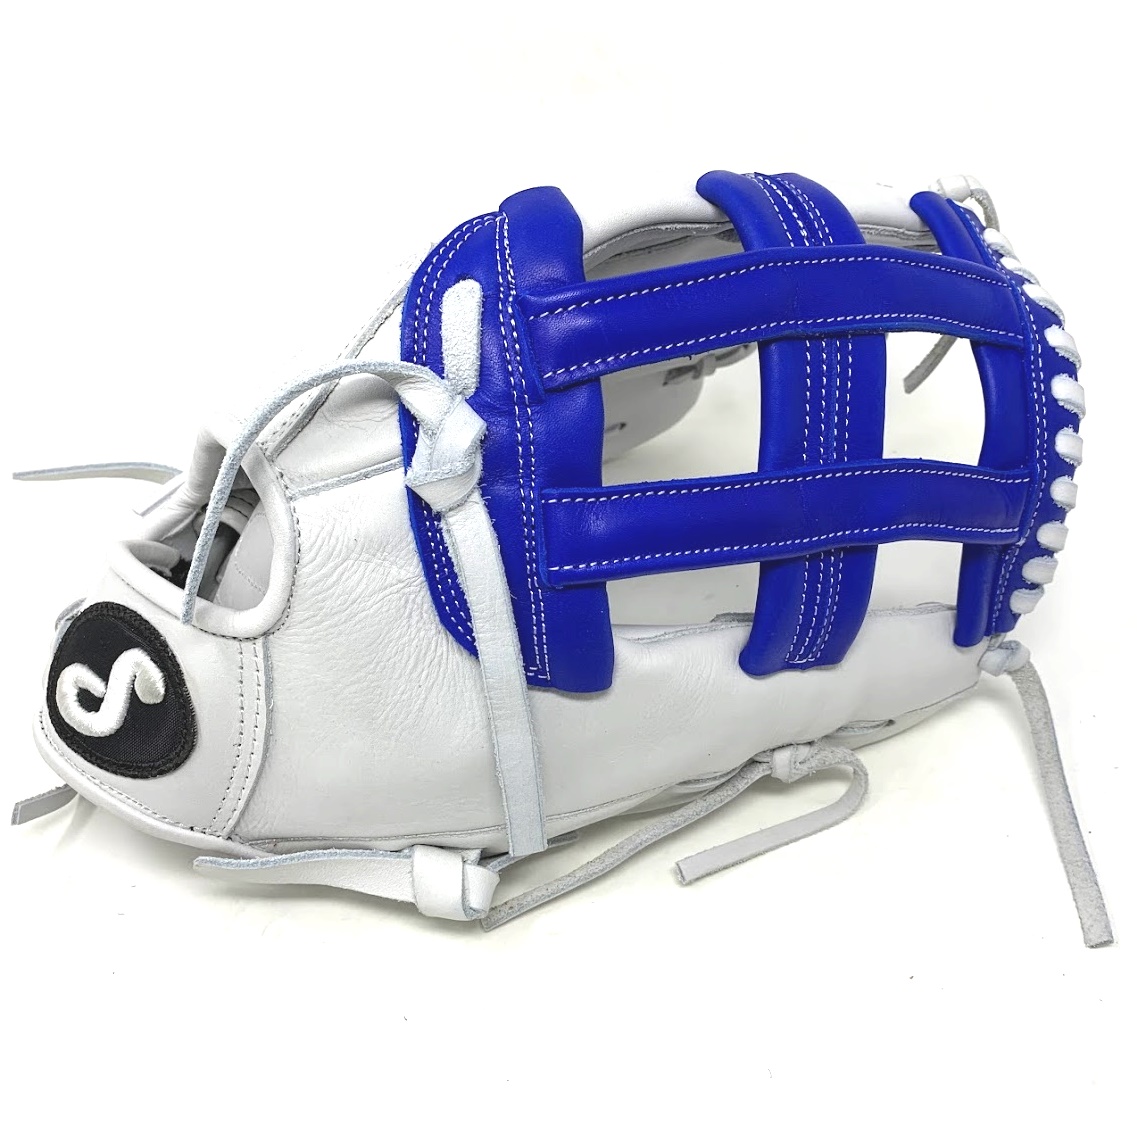 soto-white-15-inch-h-web-slow-pitch-softball-glove-right-hand-throw SS20-15-WHRY-H-RightHandThrow soto  Made in Mexico      The Soto family has been making